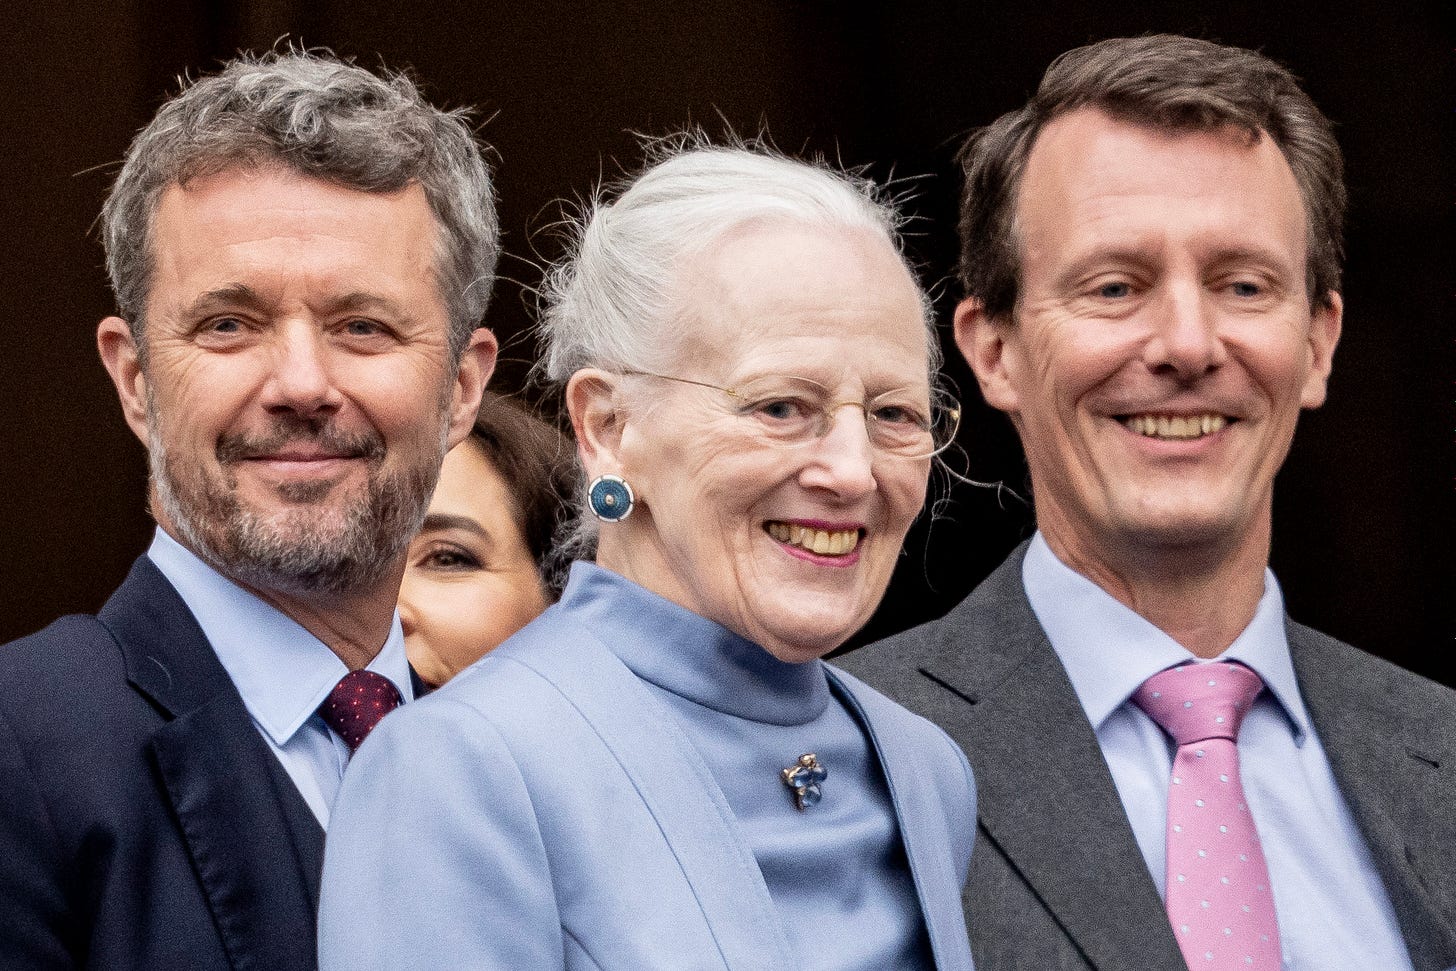 Crown Prince Frederik of Denmark, Queen Margrethe II of Denmark and Prince Joachim of Denmark arrive for the Queen's 83rd birthday celebrations at Amalienborg Castle